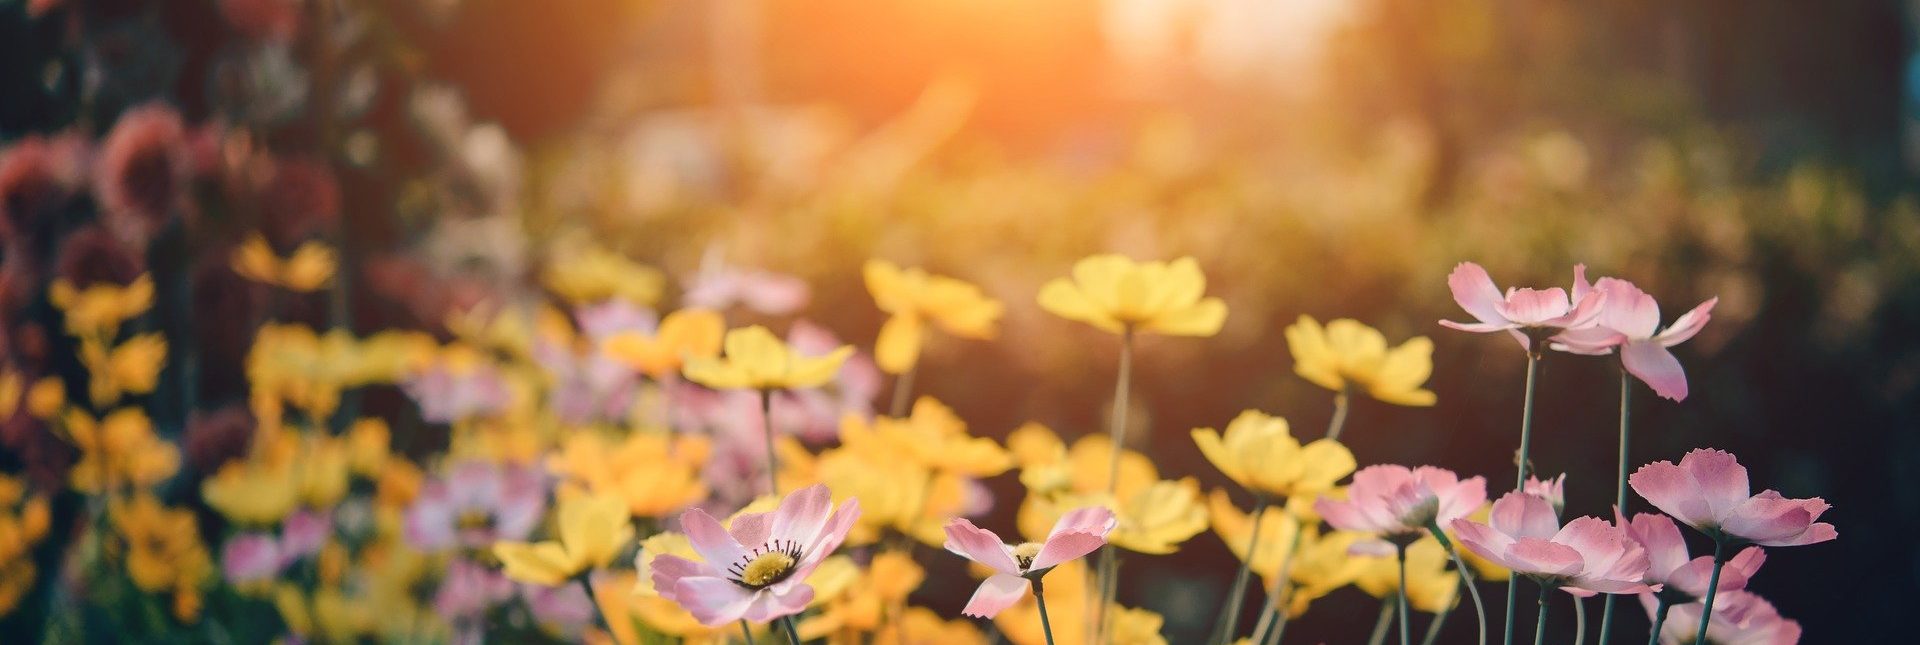 Introducing the Top 5 Flowers for Spring | Dallas Landscaping Services Company | Southern Botanical